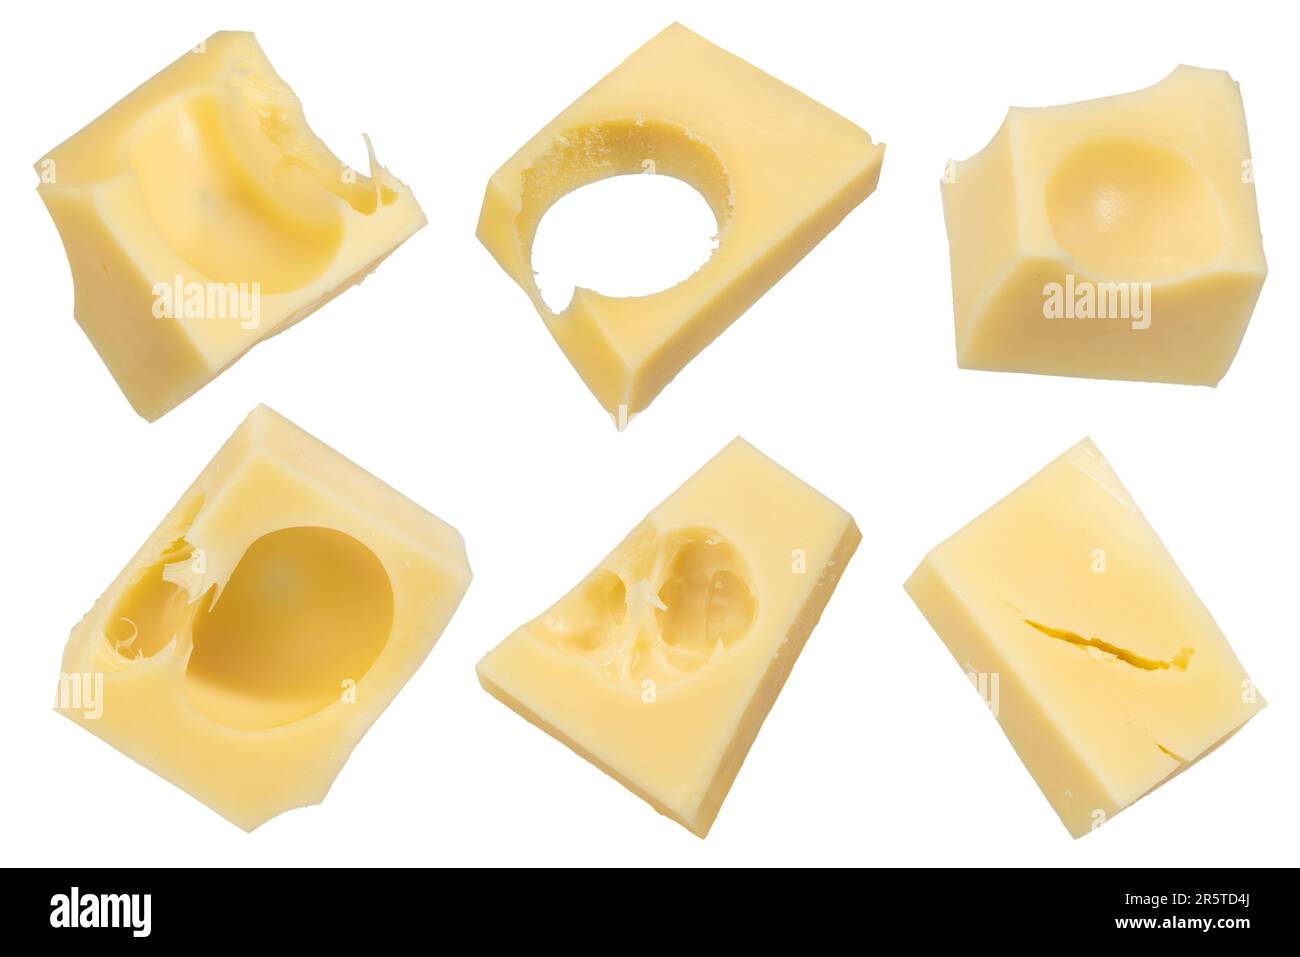 Pieces of emmental cheese on a white isolated background. Pieces